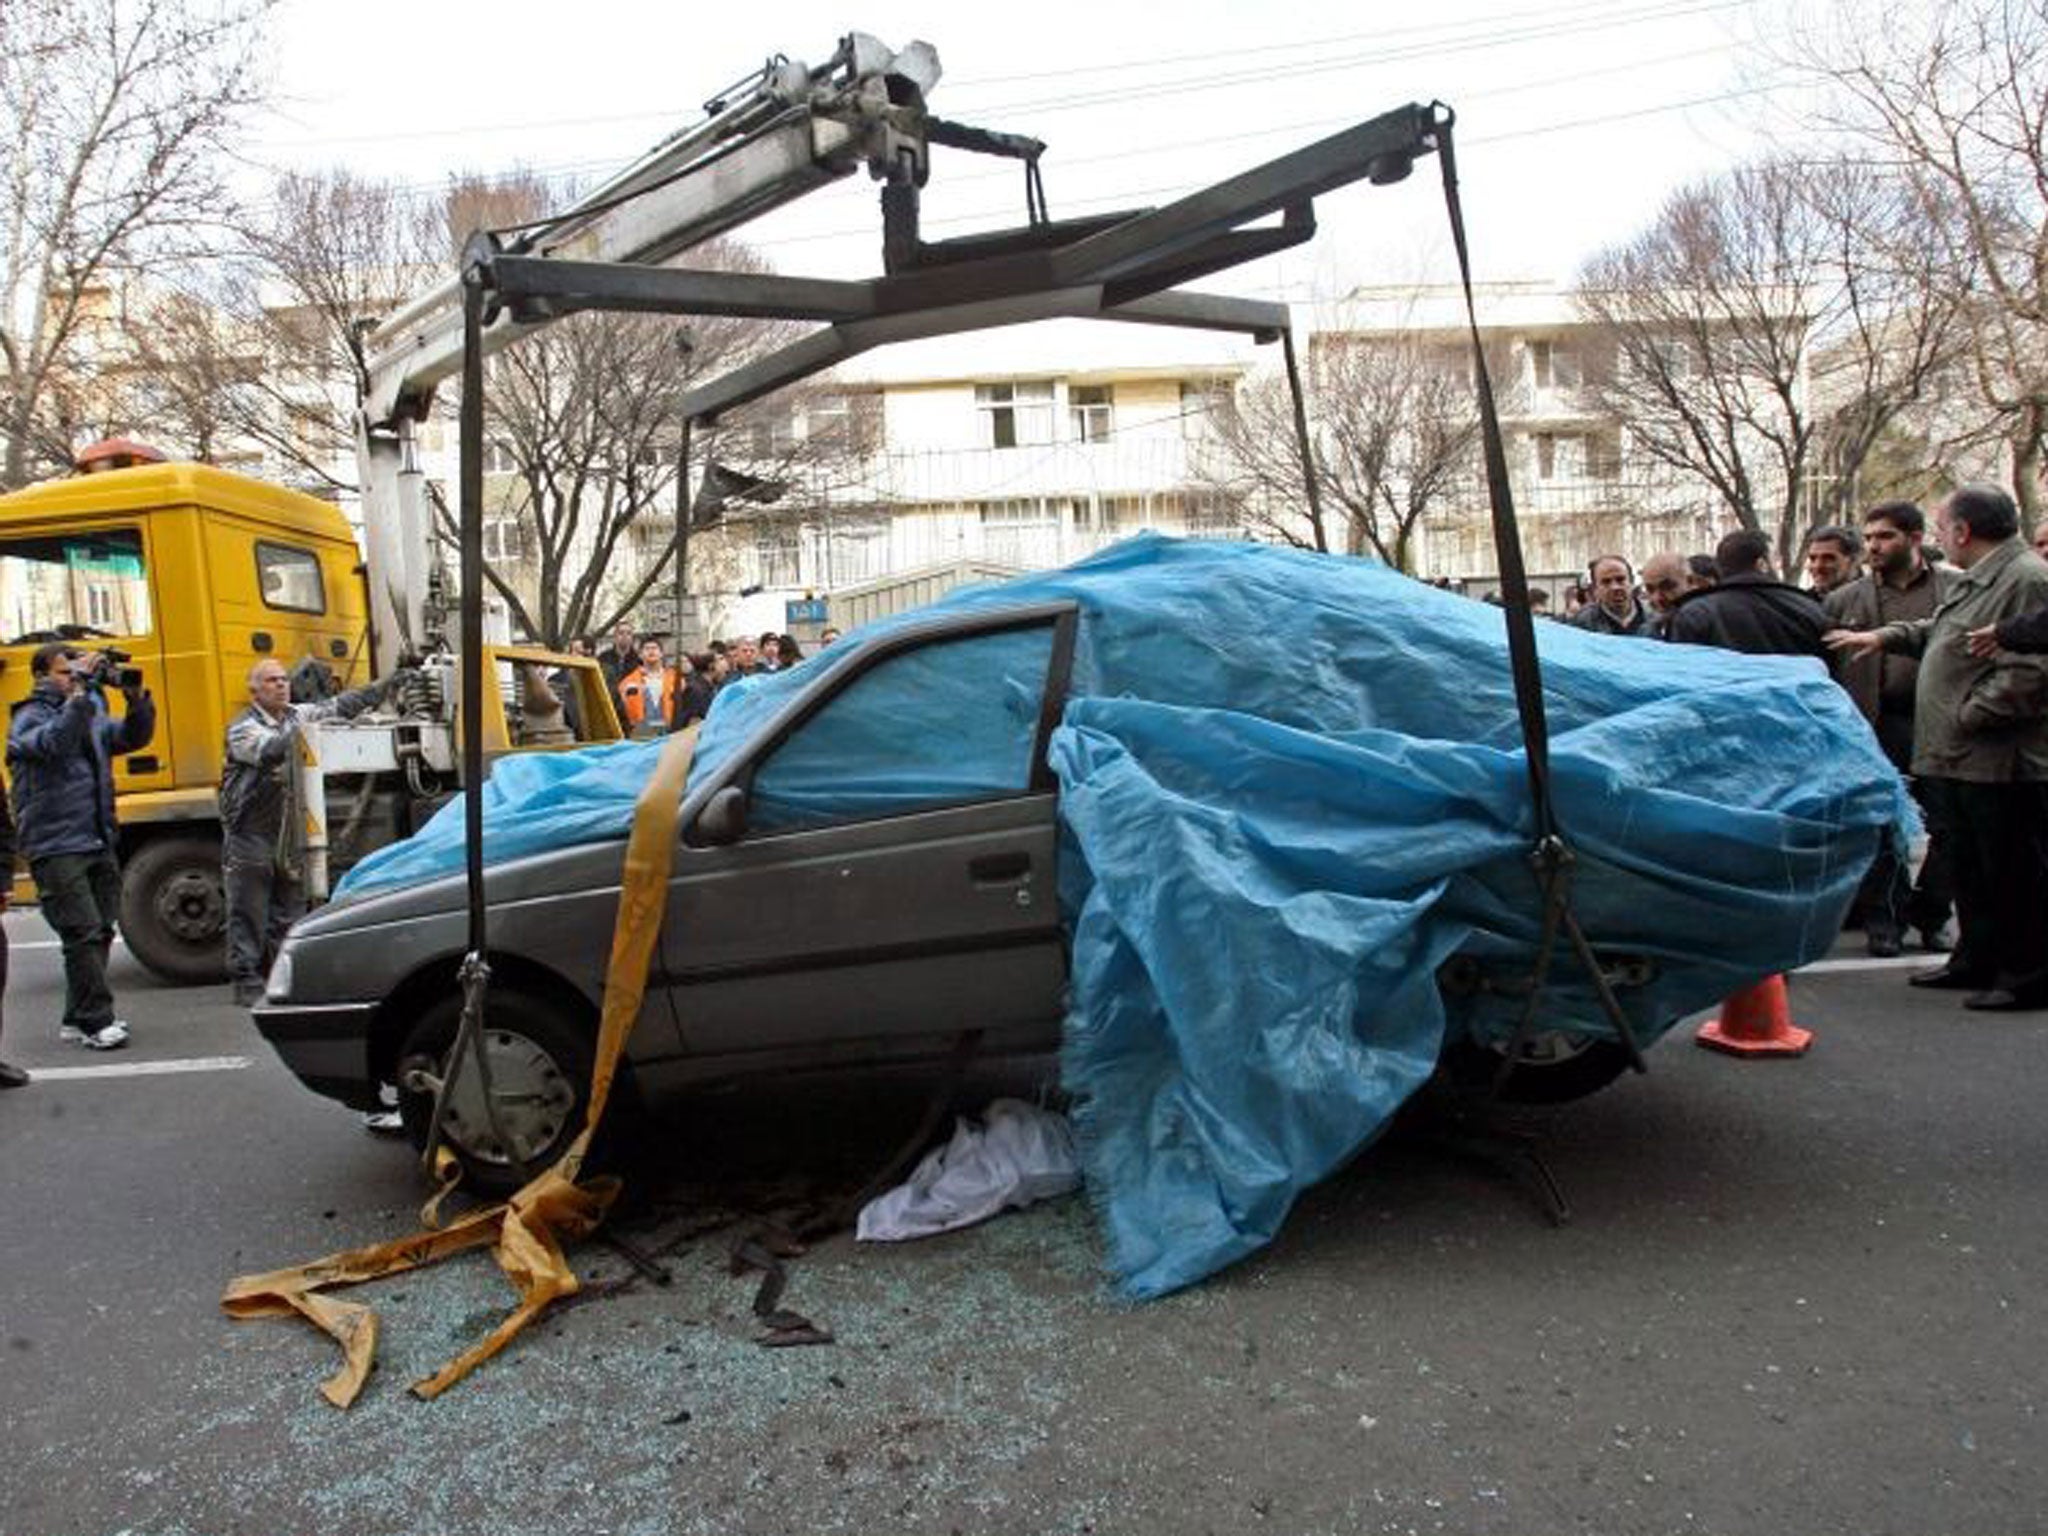 Grim toll: The bombed car of Mostafa Ahmadi-Roshan, who was killed in January 2012 – one of five to die since 2007